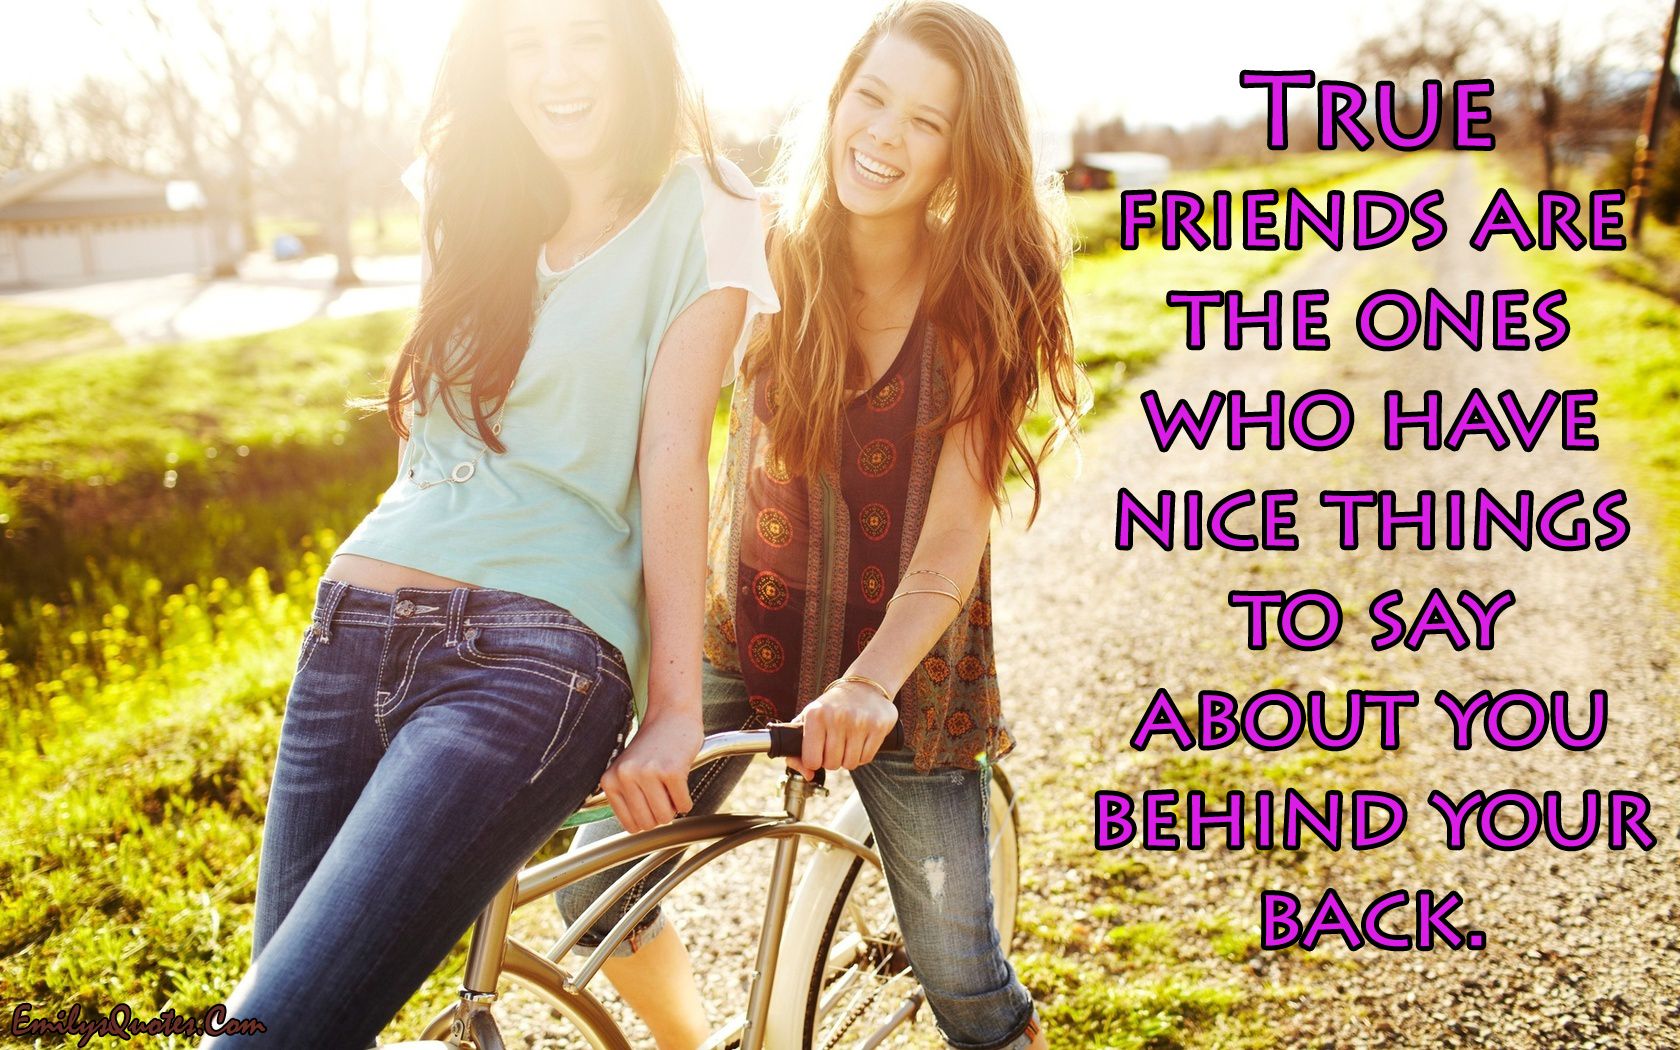 Quotes About True Friends Always Being There True Friends Are The Ones Who Have Nice Things To Say About You–photos